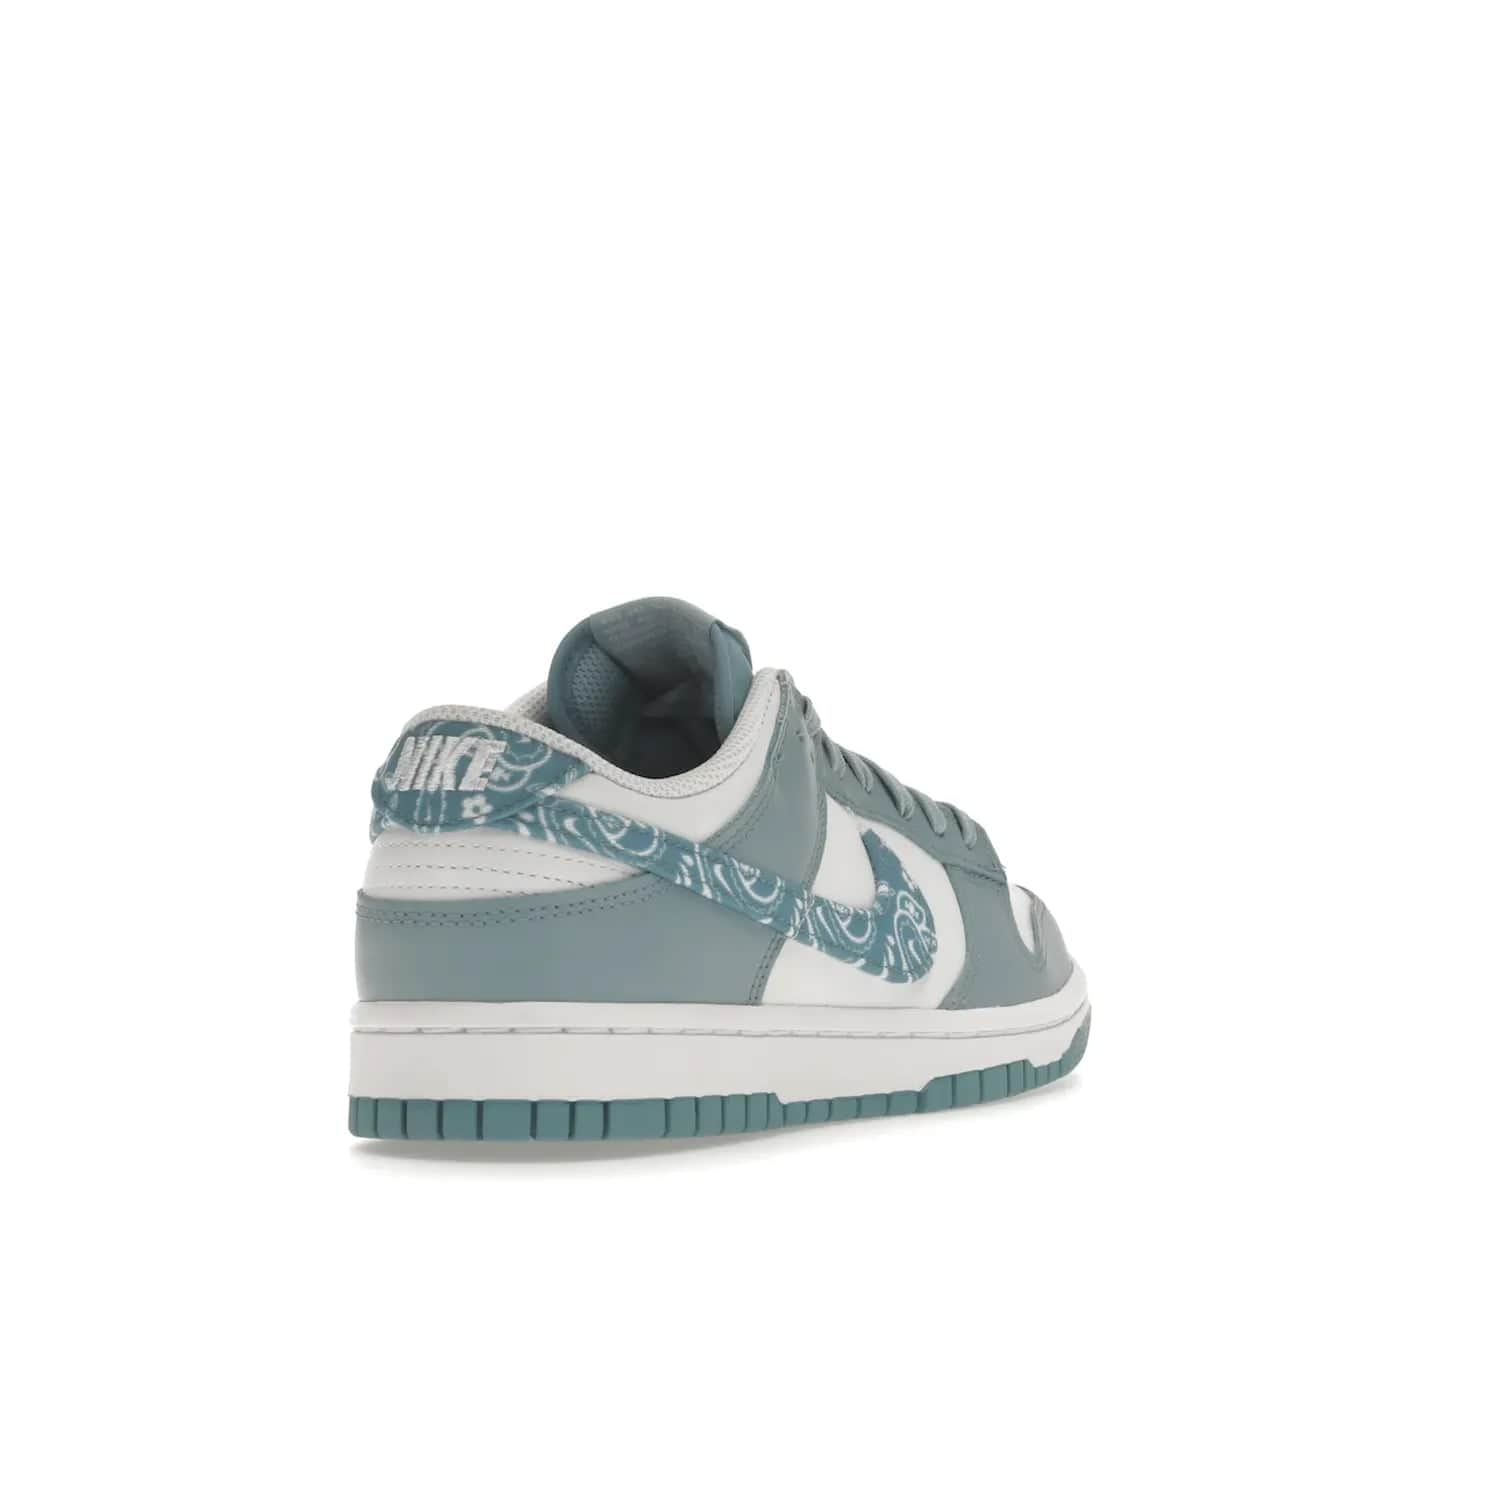 Nike Dunk Low Essential Paisley Pack Worn Blue (Women's) - Image 31 - Only at www.BallersClubKickz.com - Get the Nike Dunk Low Essential Paisley Pack Worn Blue (Women's) for style and comfort. White leather construction, light blue leather overlays, canvas Swooshes and matching heel tabs offer a rich blue hue. Finished by a white and light blue sole, this classic Nike Dunk is the perfect addition to any wardrobe. Released in March 2022.